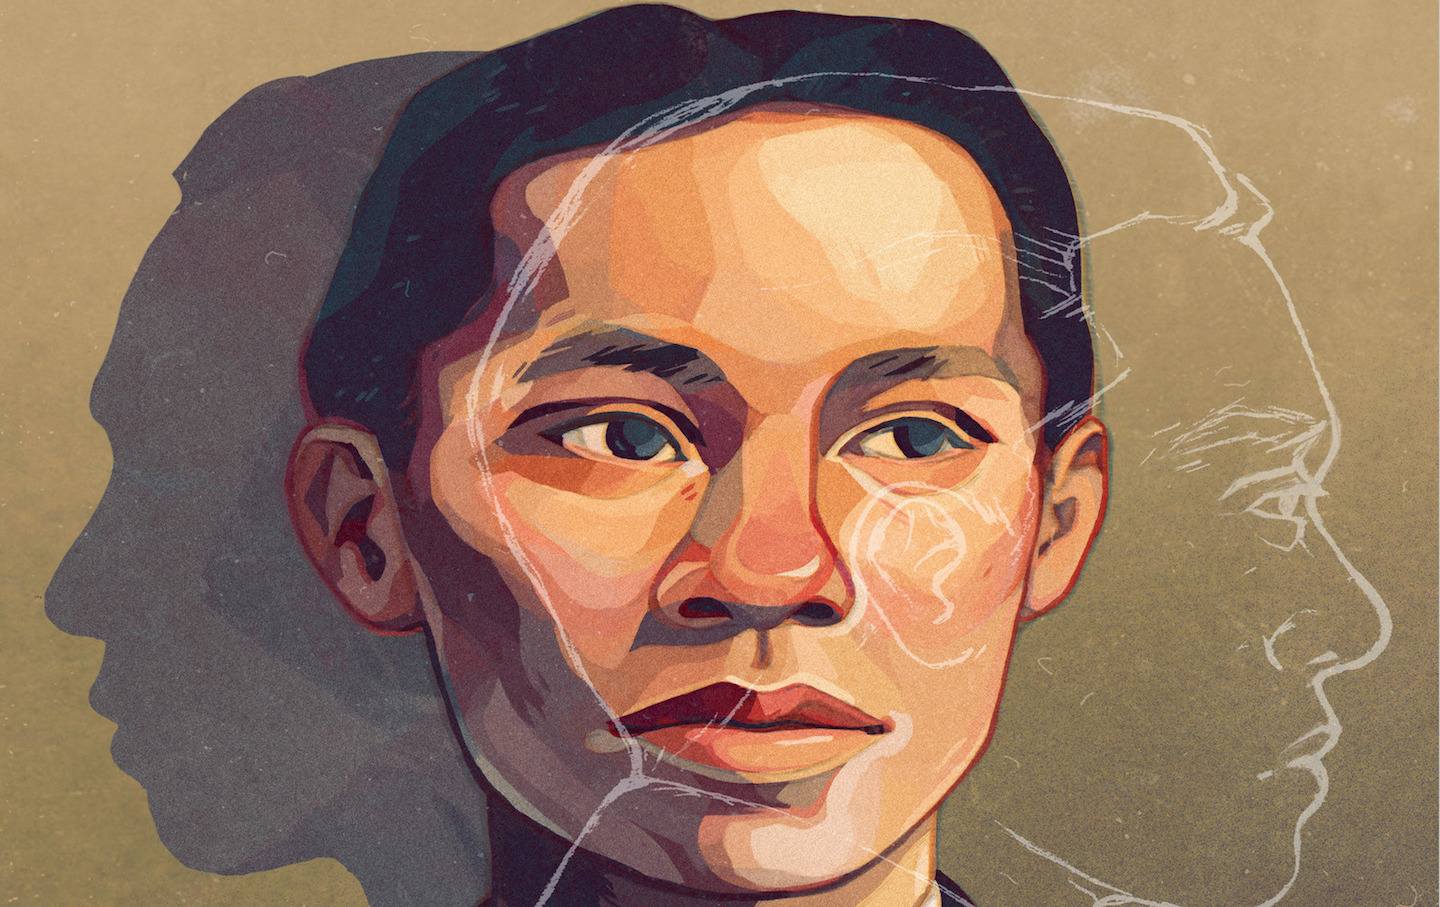 Carlos Bulosan’s 1946 Novel About Filipino Migrant Workers Is Still Groundbreaking